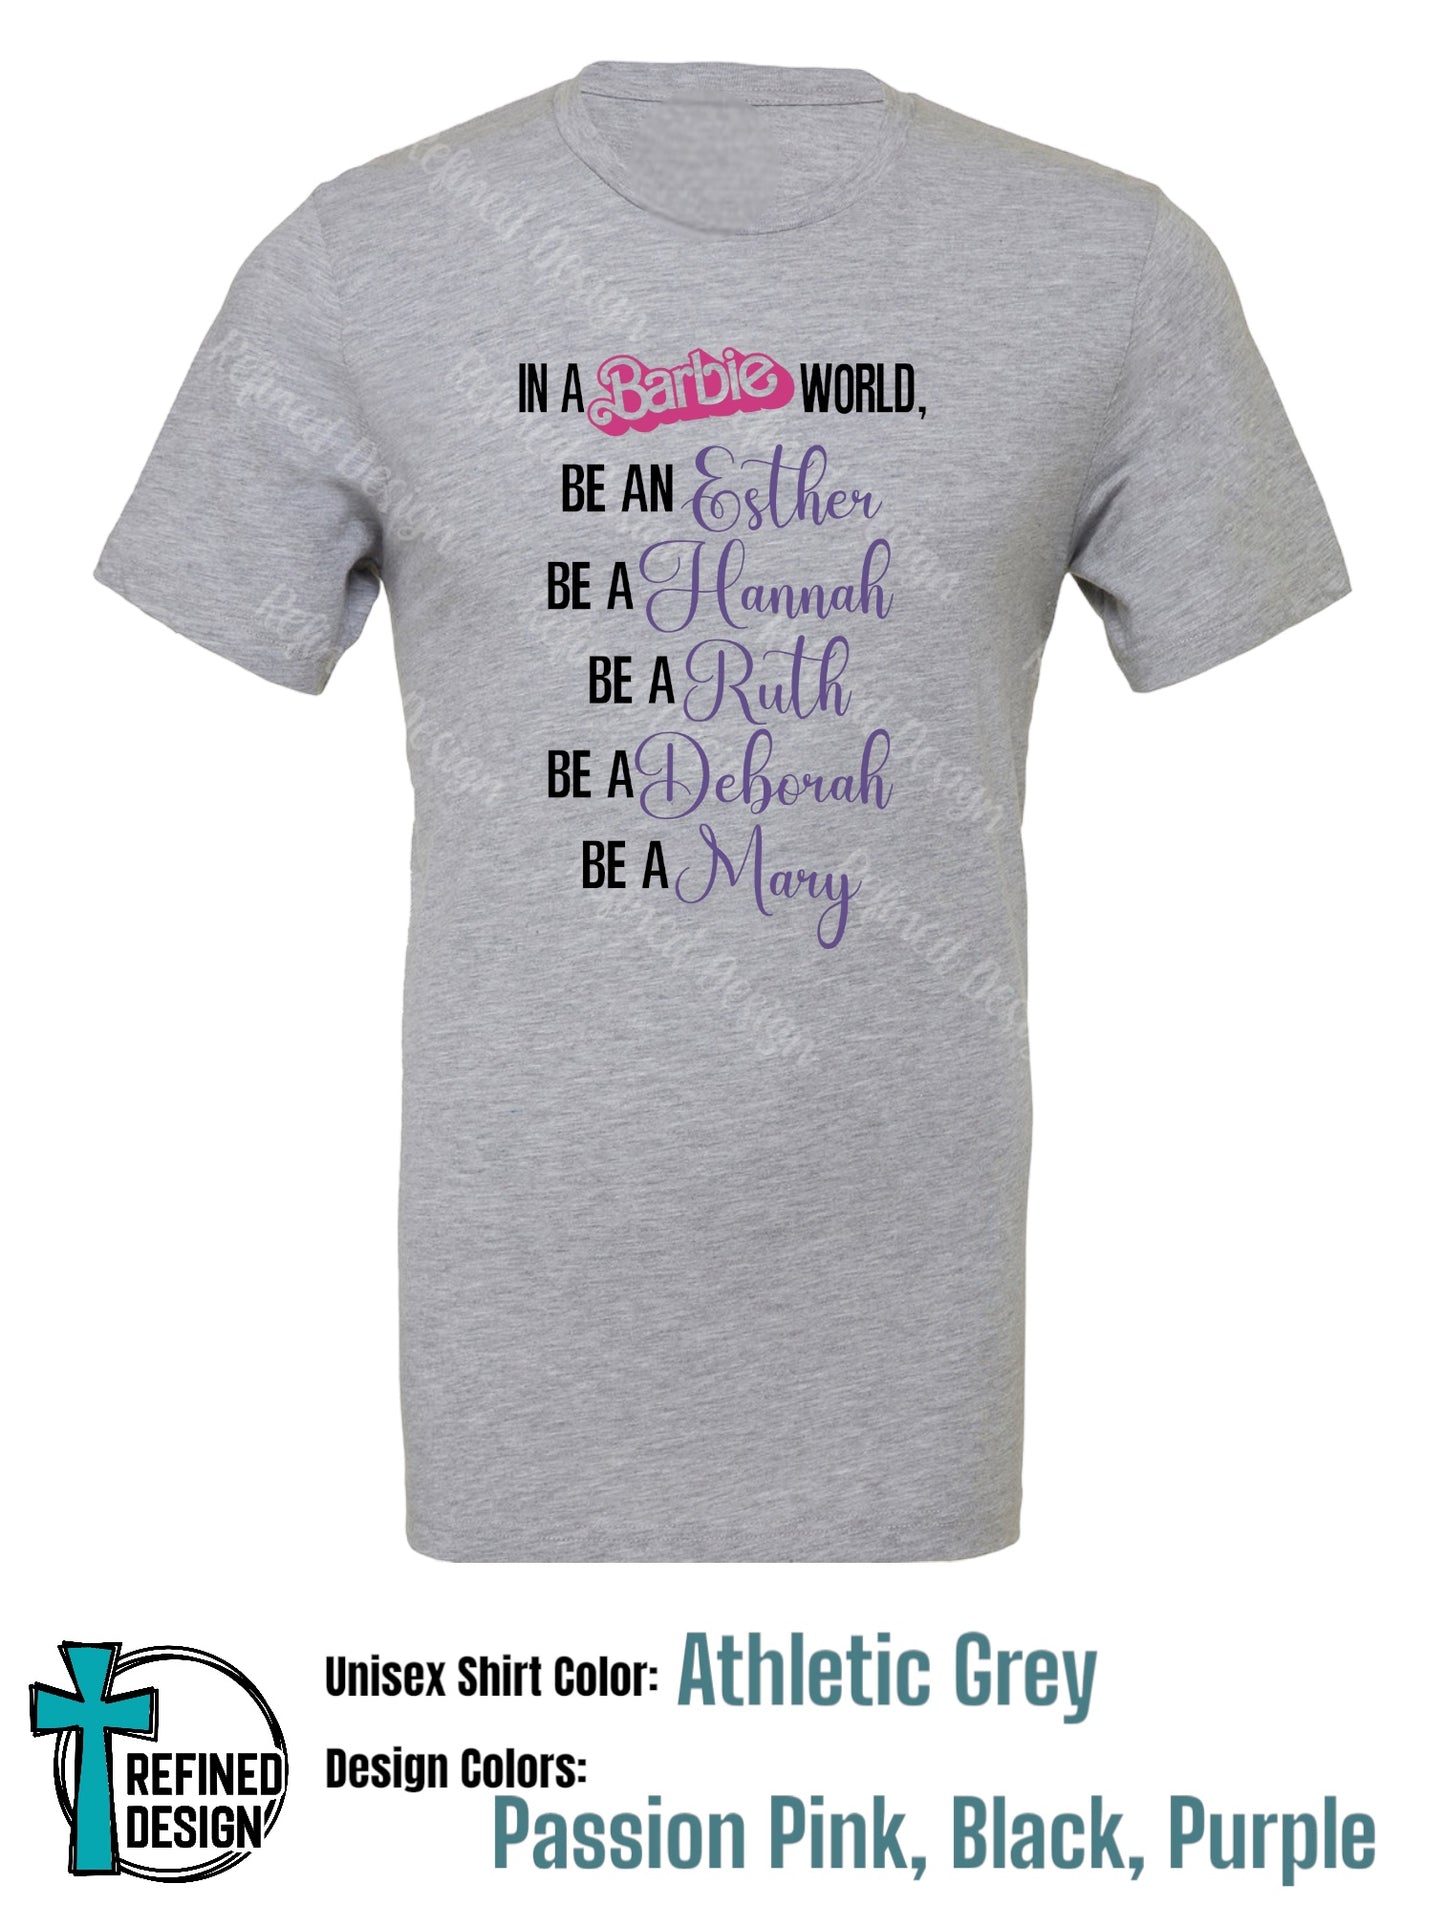 “Don’t Be A Barbie” T-Shirt